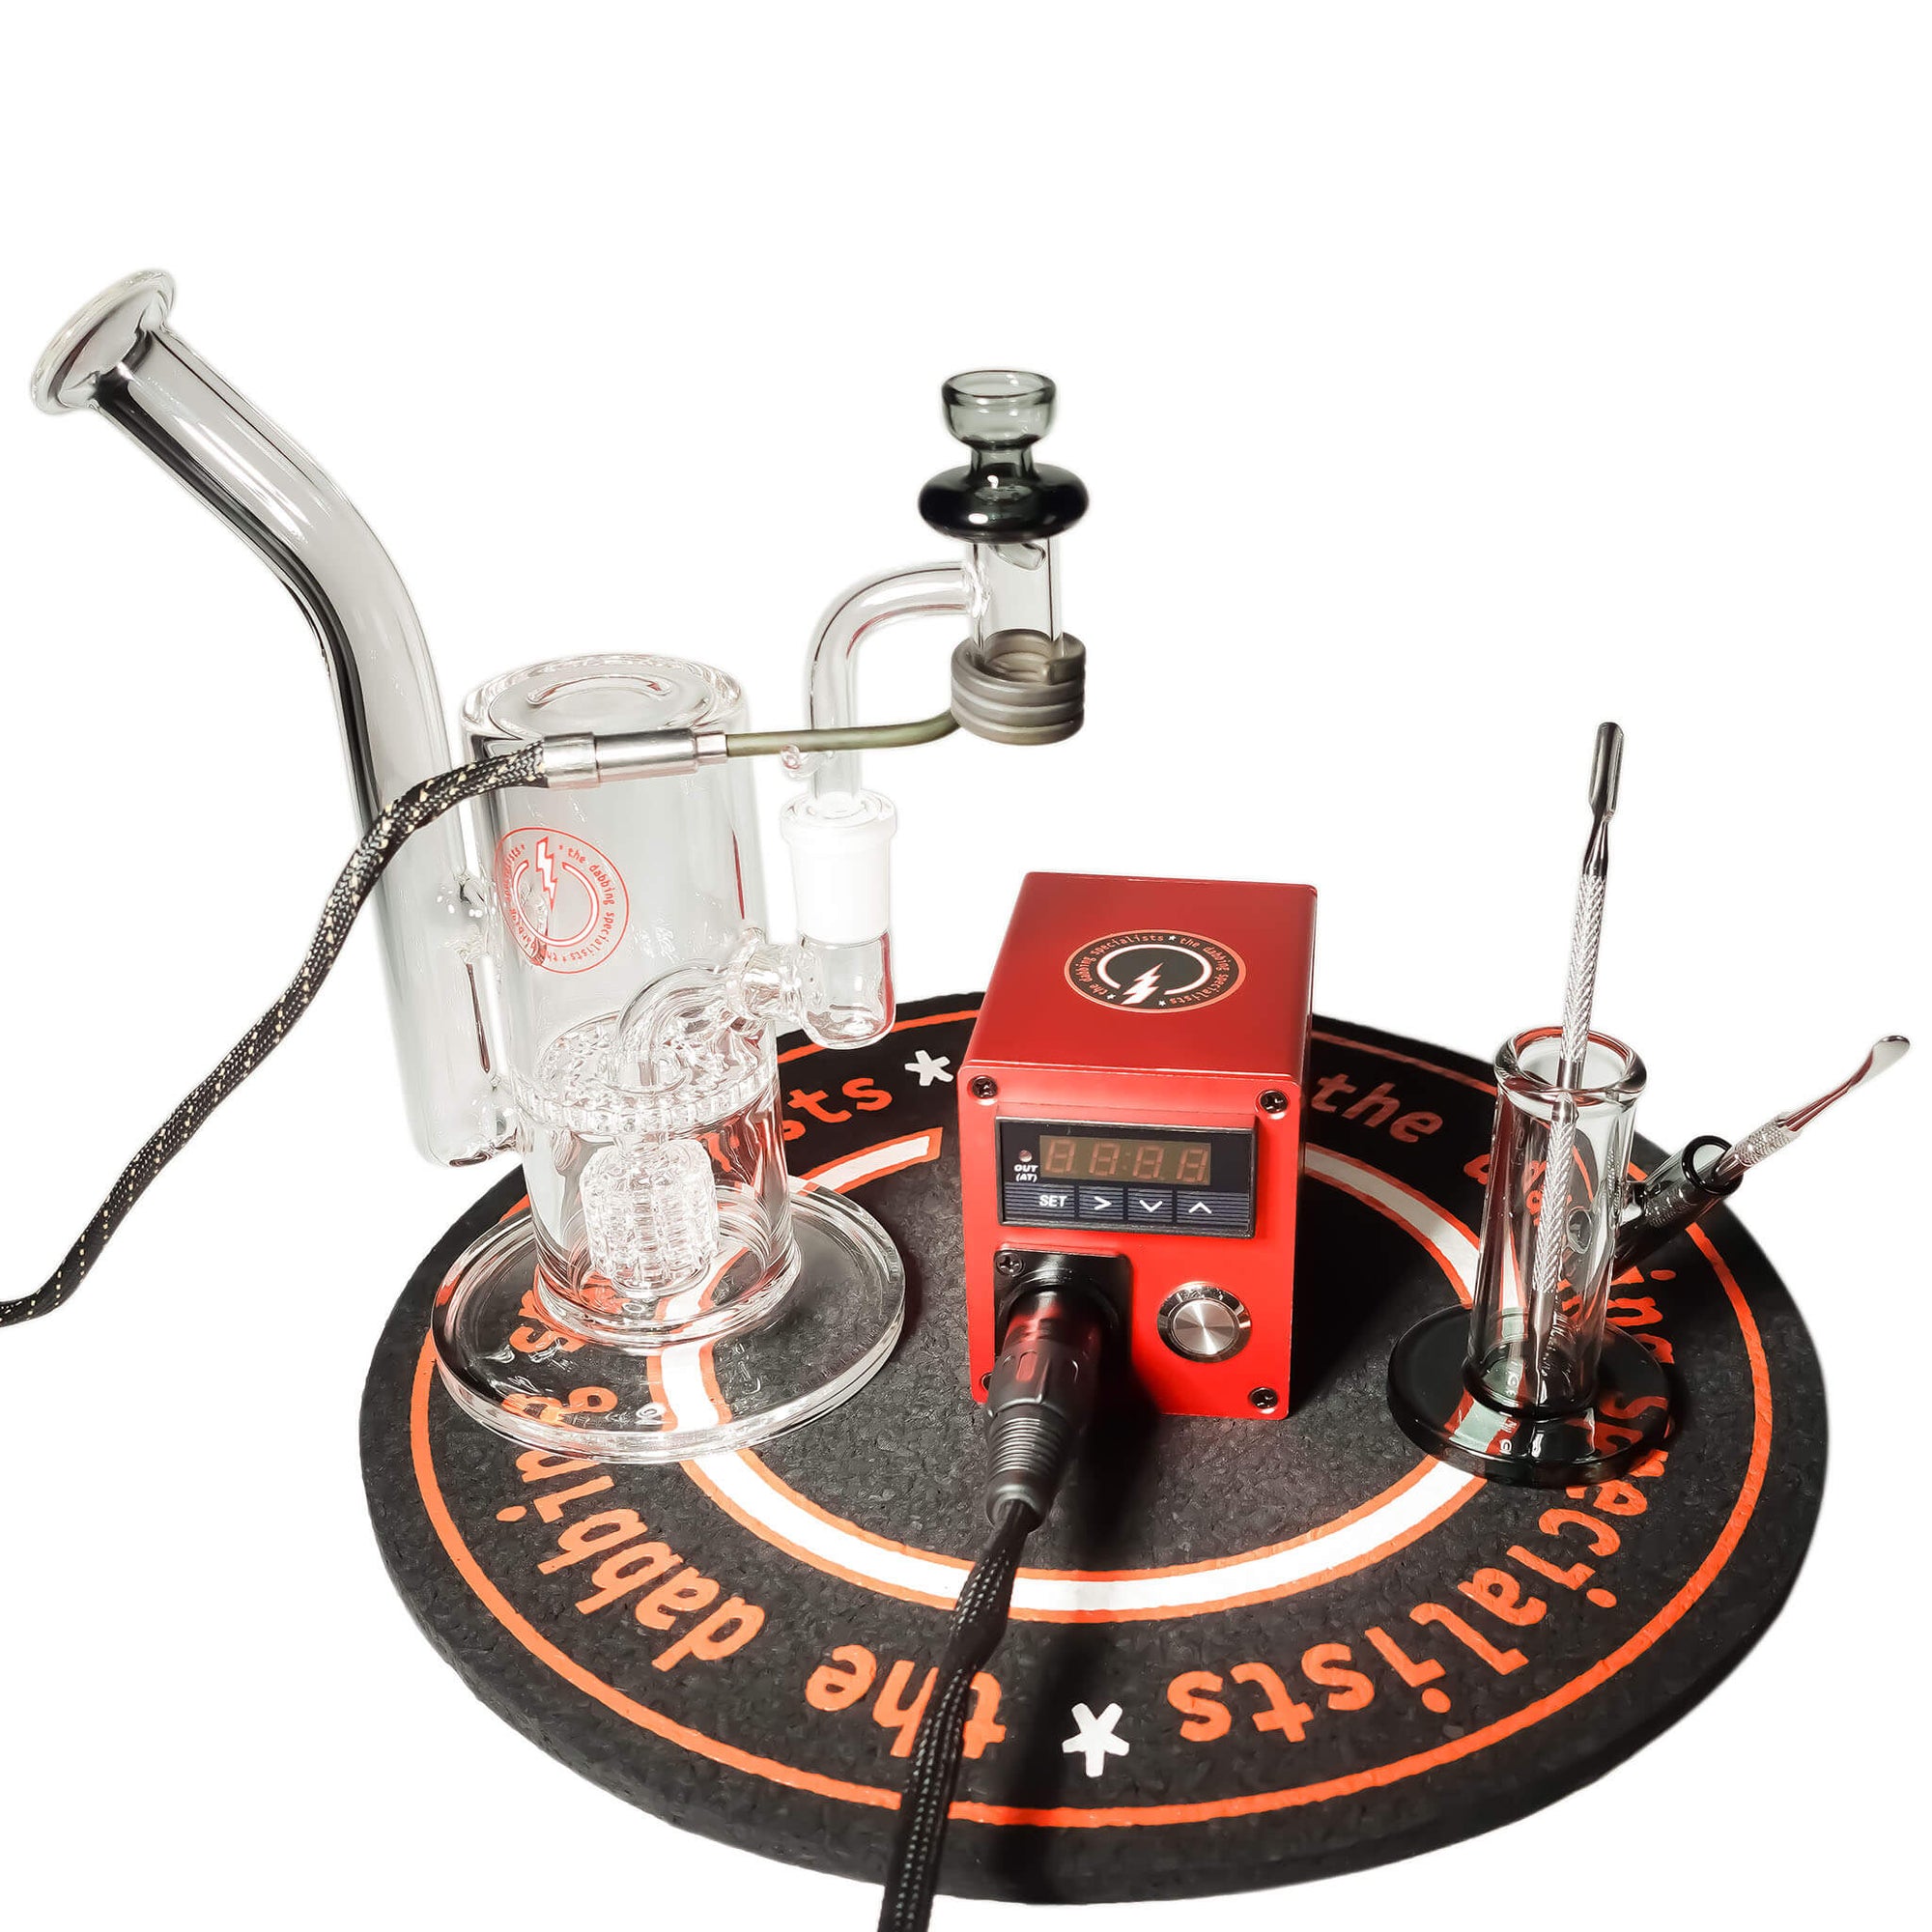 Reborn 16mm E-Banger Deluxe Enail Kit | Red Enail Kit View | the dabbing specialists